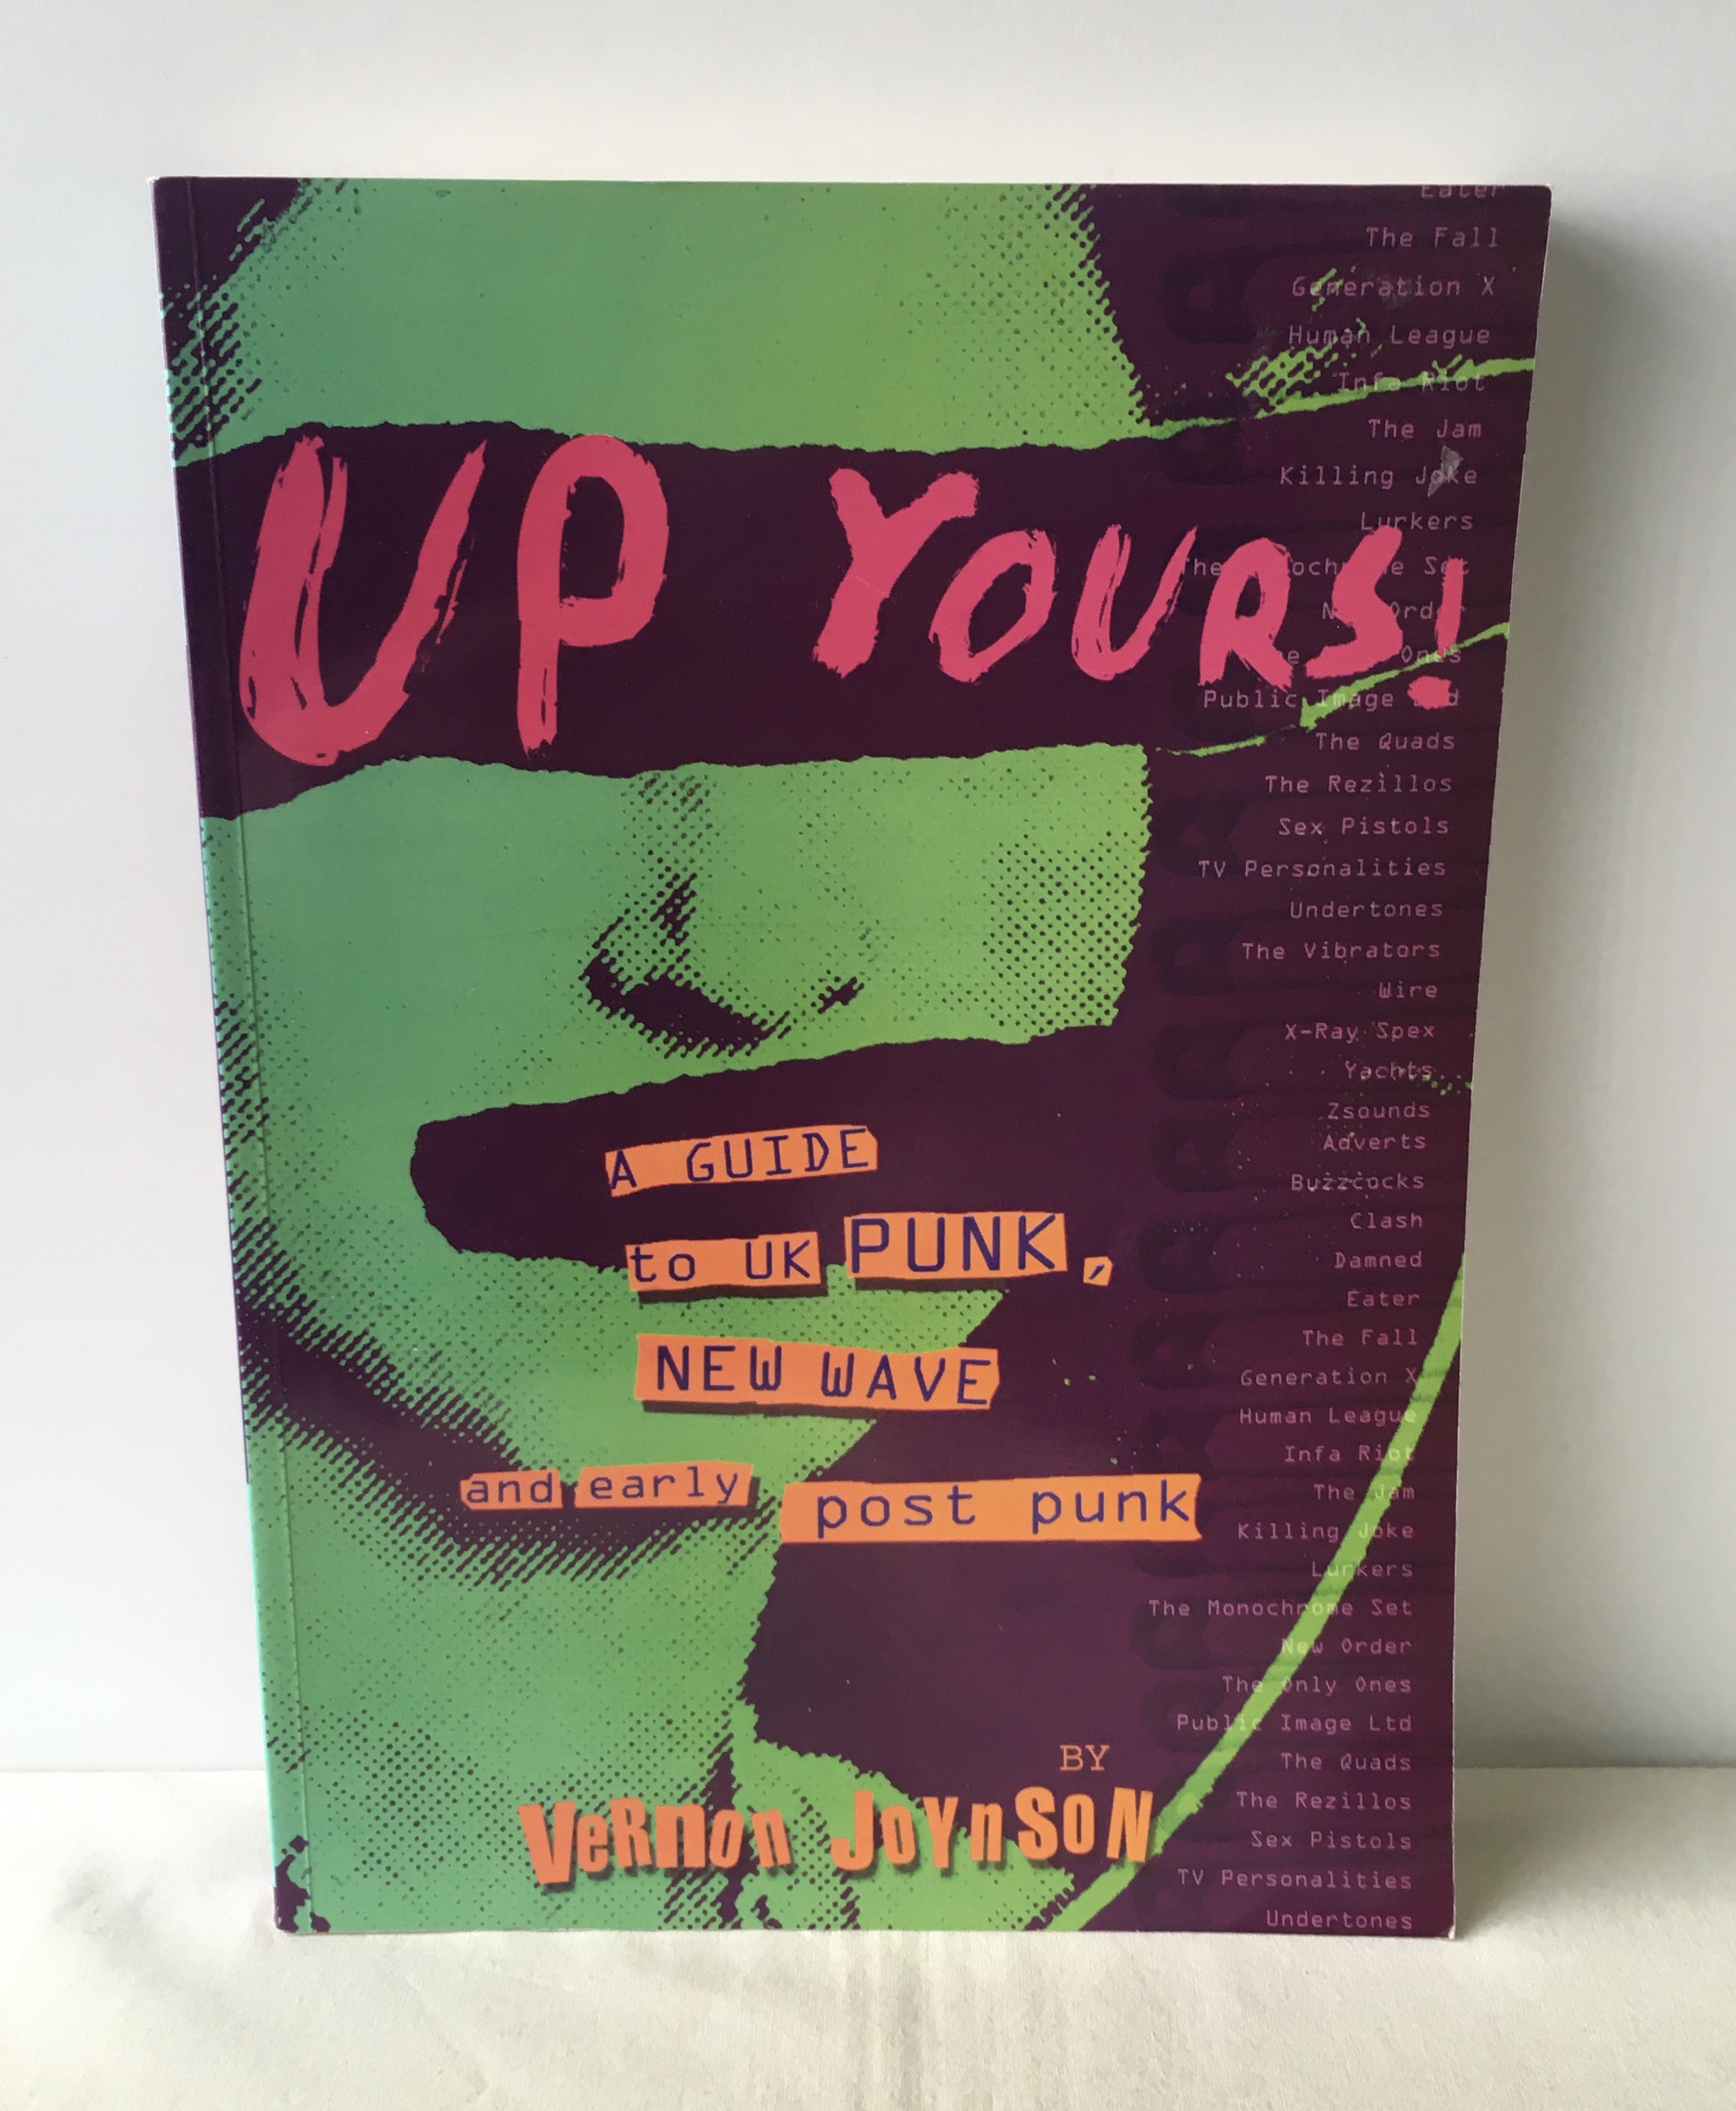 Up Yours!: A Guide to UK Punk, New Wave and Early Post Punk - Joynson, Vernon